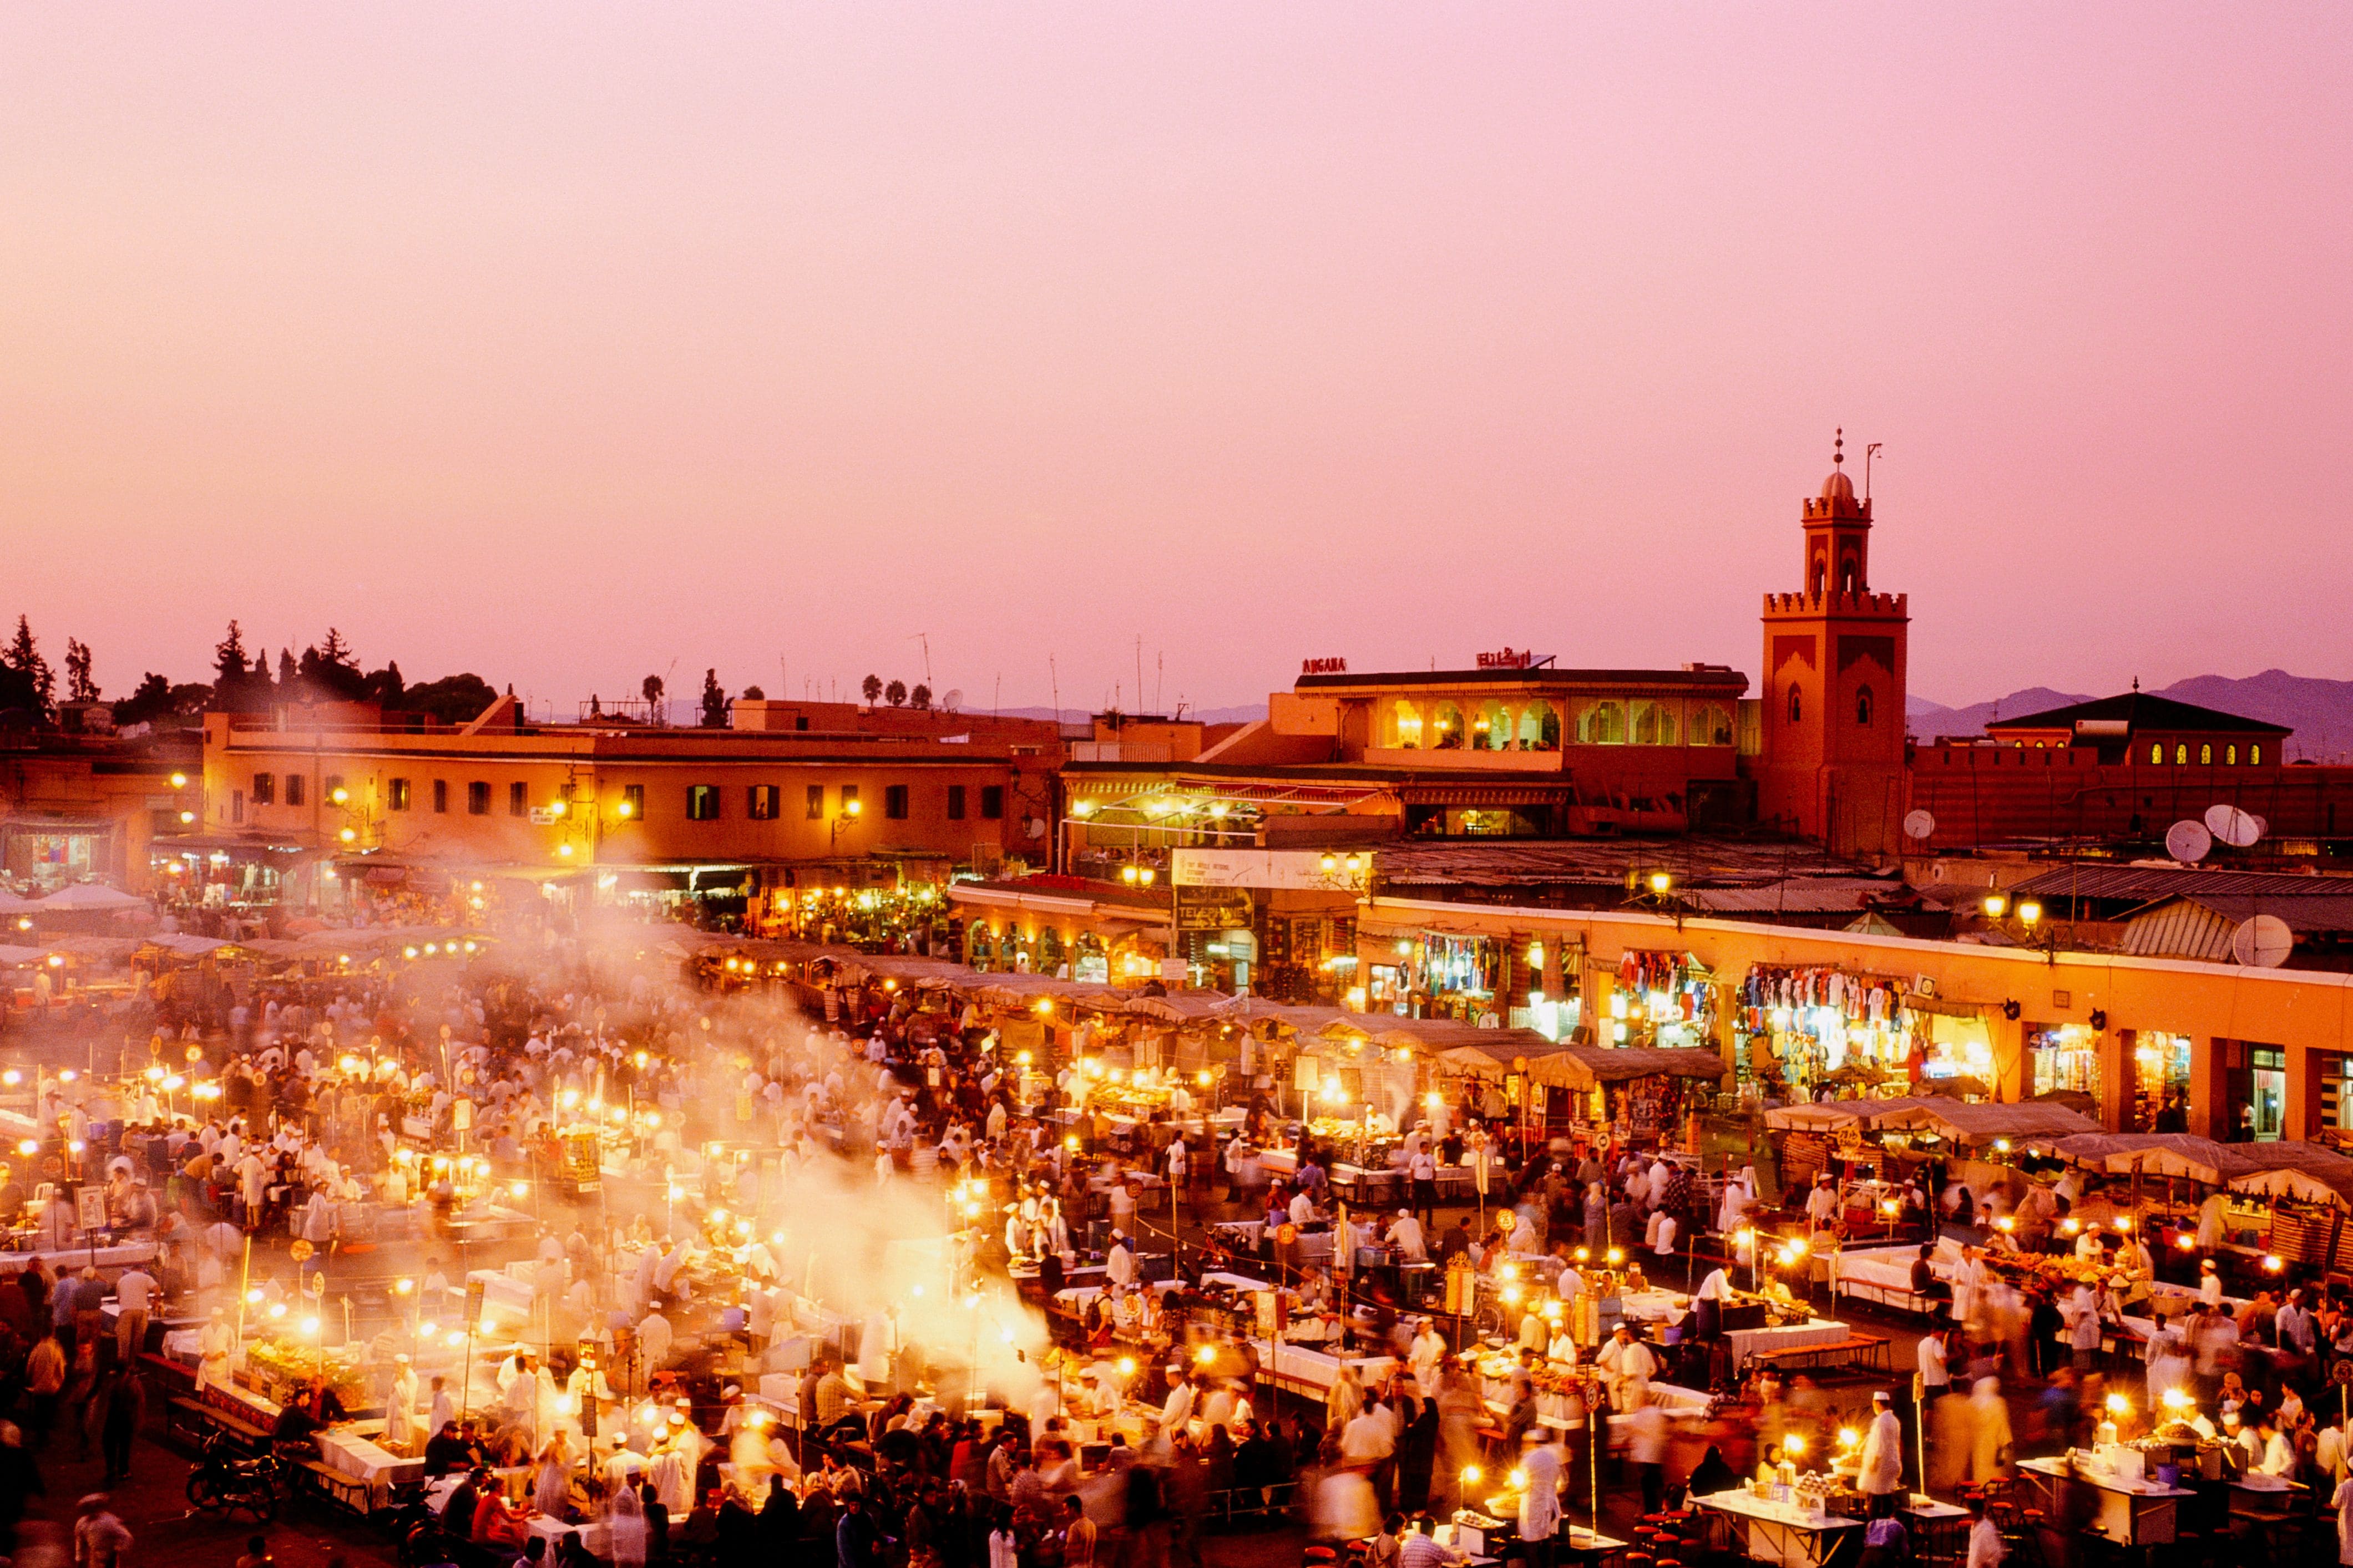 The Jemaa el-Fnaa by evening busy with market stalls, traders and shoppers